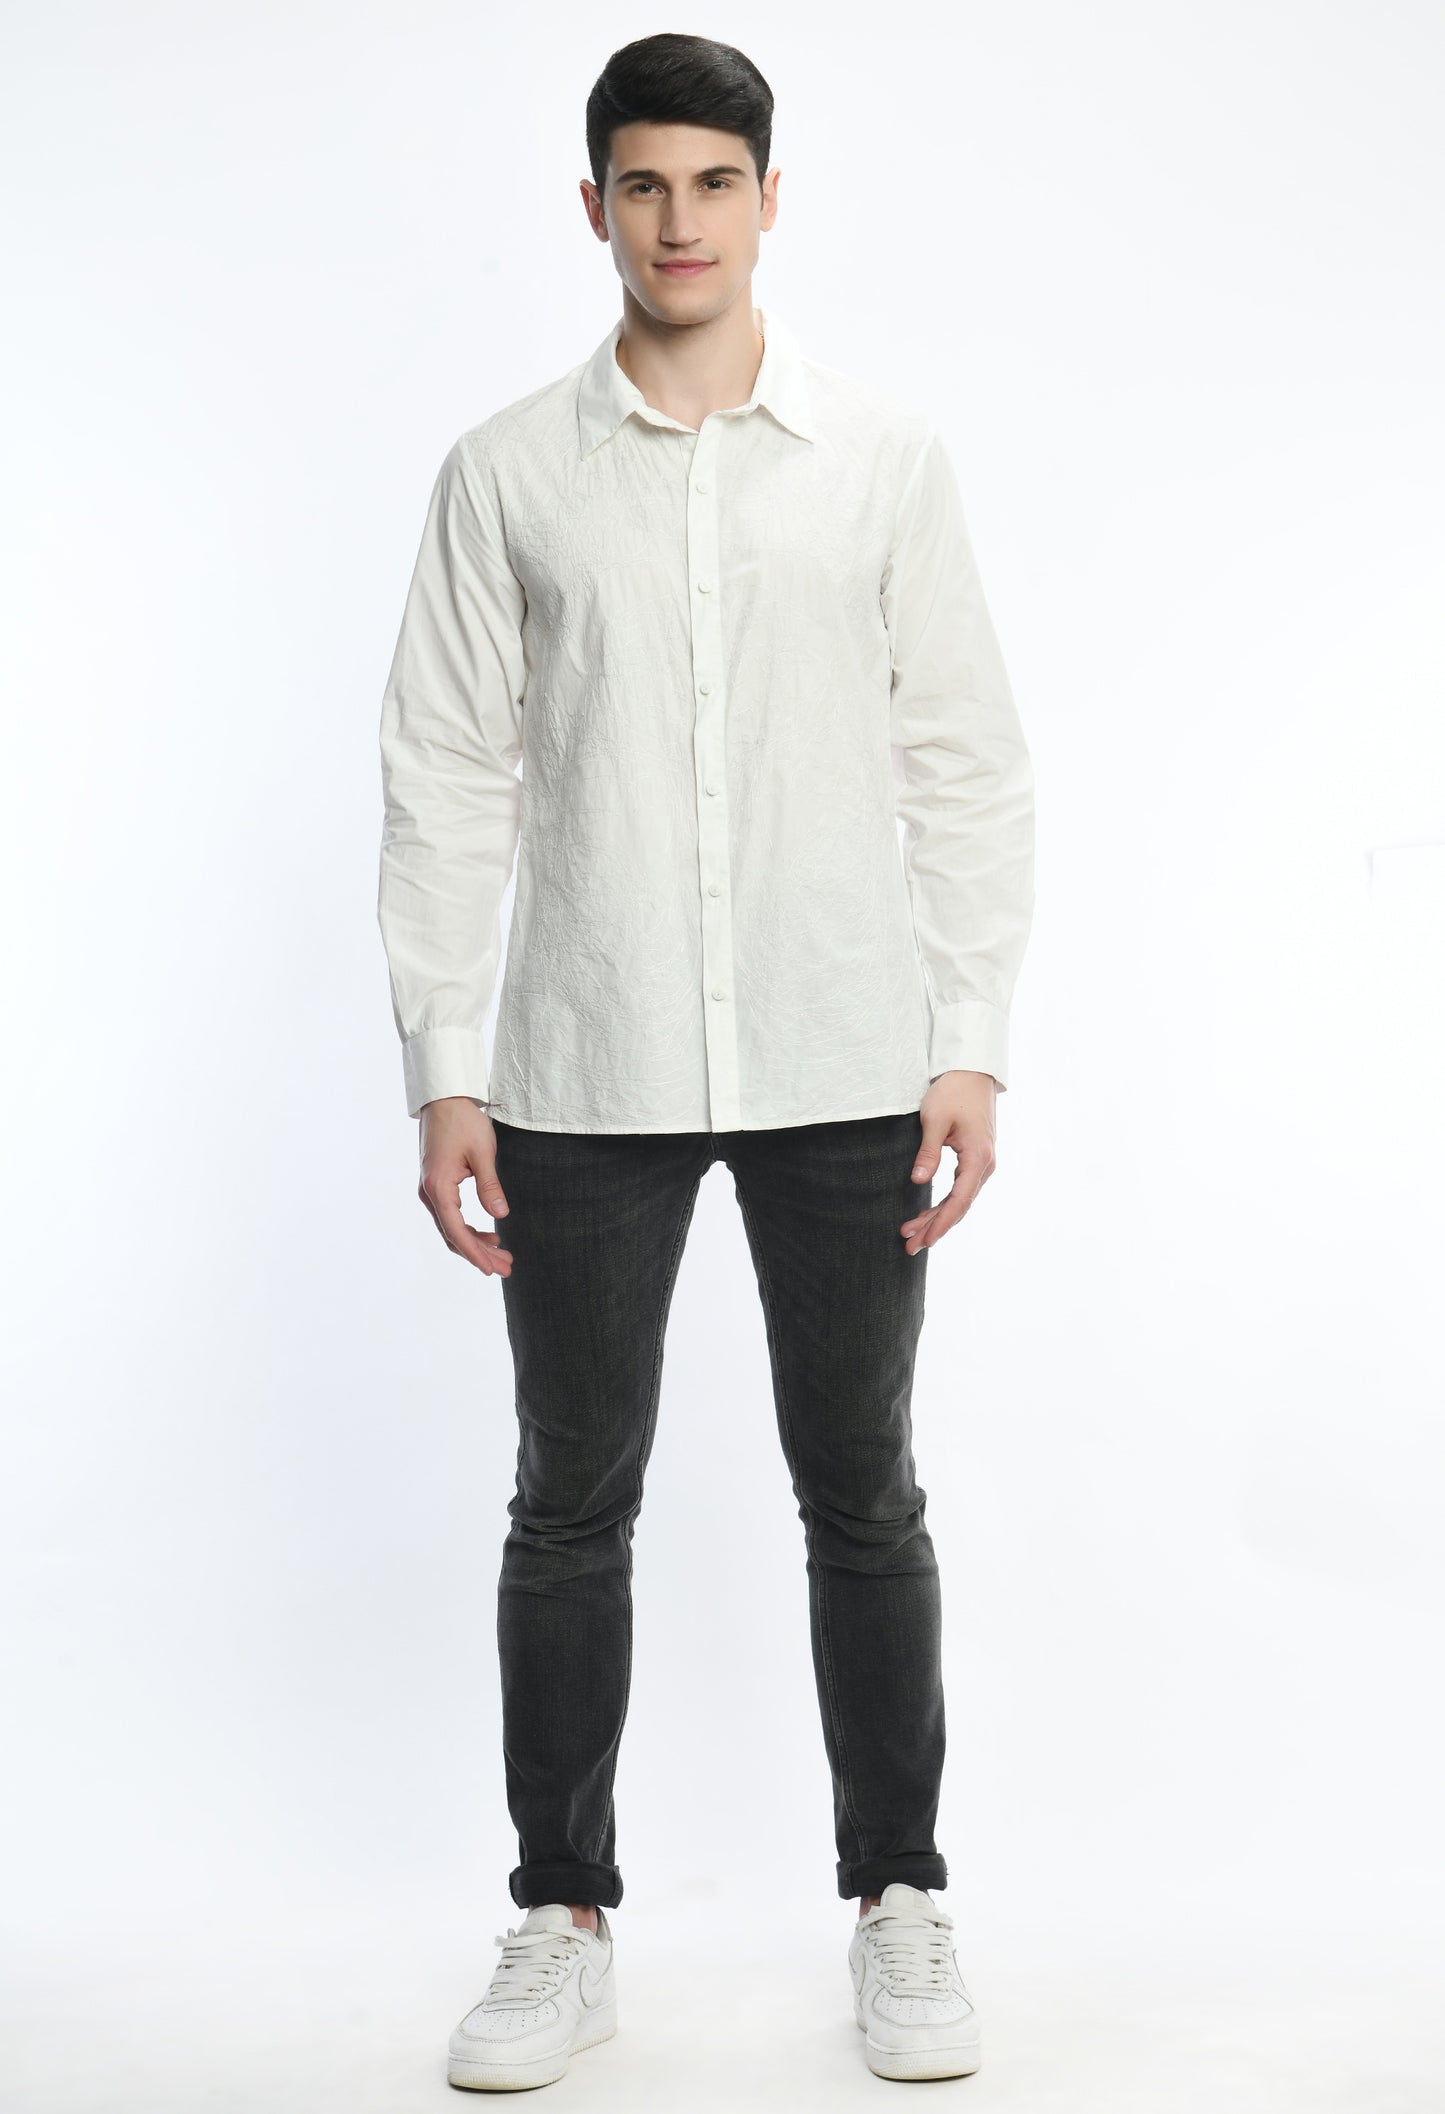 A white cotton shirt showcasing tone on tone abstract thread embroidery